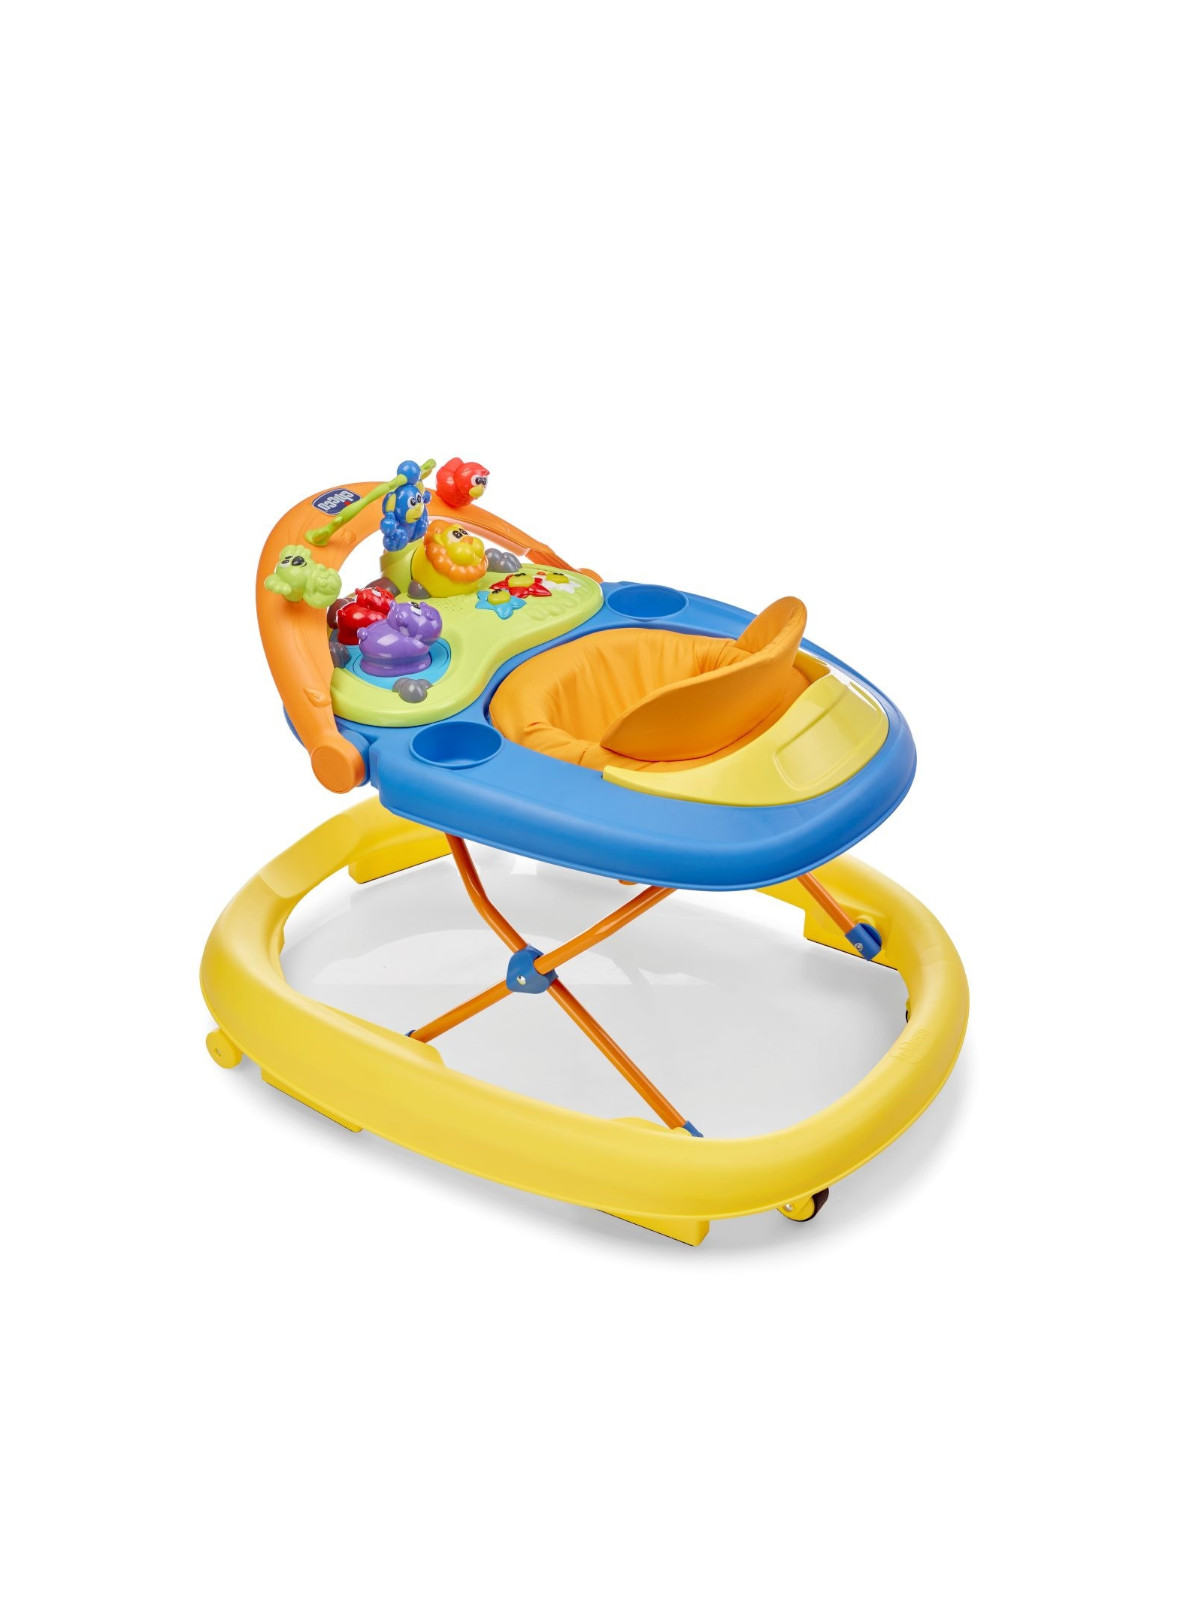 Chicco - walky talky baby walker sunny 6102 - Chicco